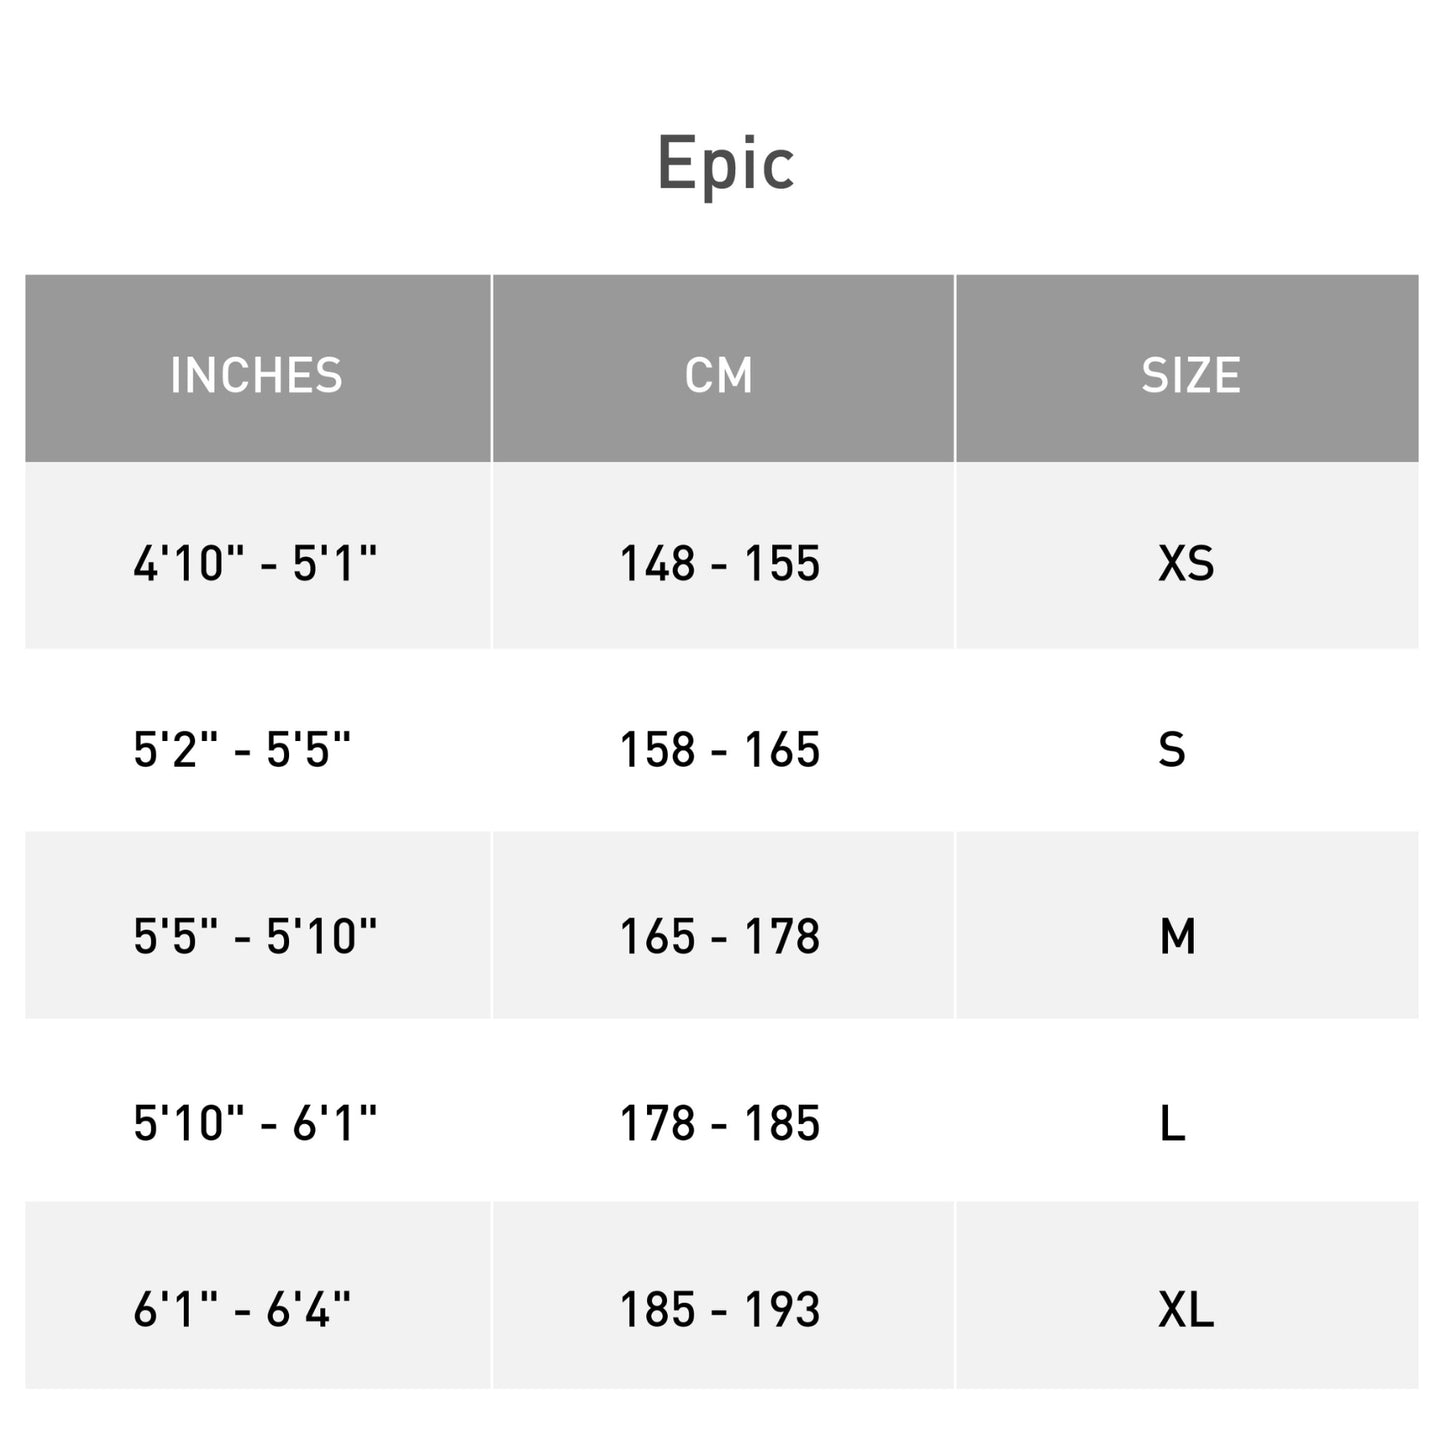 Apecialized Epic Size Chart